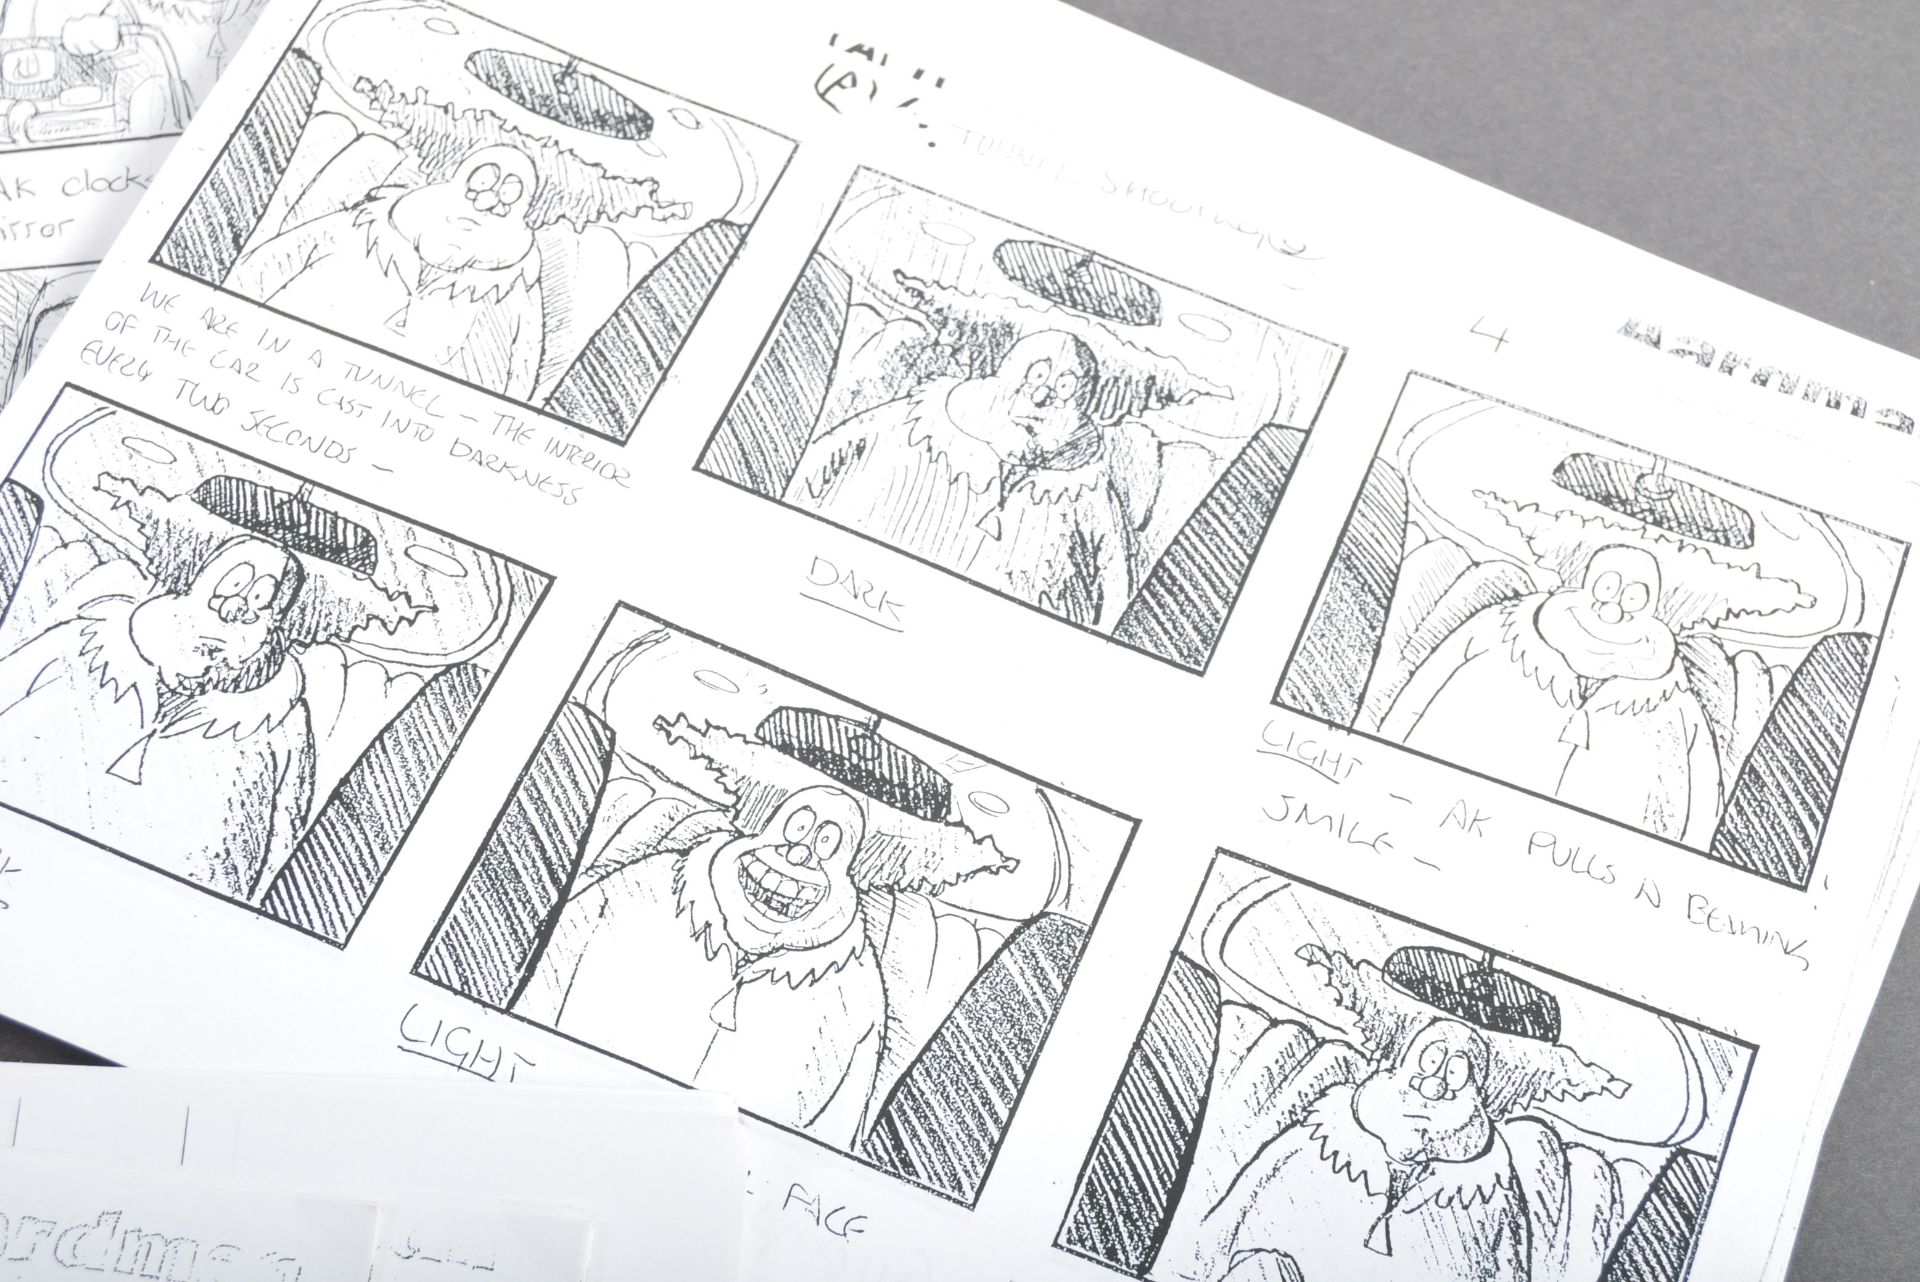 AARDMAN ANIMATIONS - ANGRY KID (1999) - PRODUCTION STORYBOARDS - Bild 4 aus 7